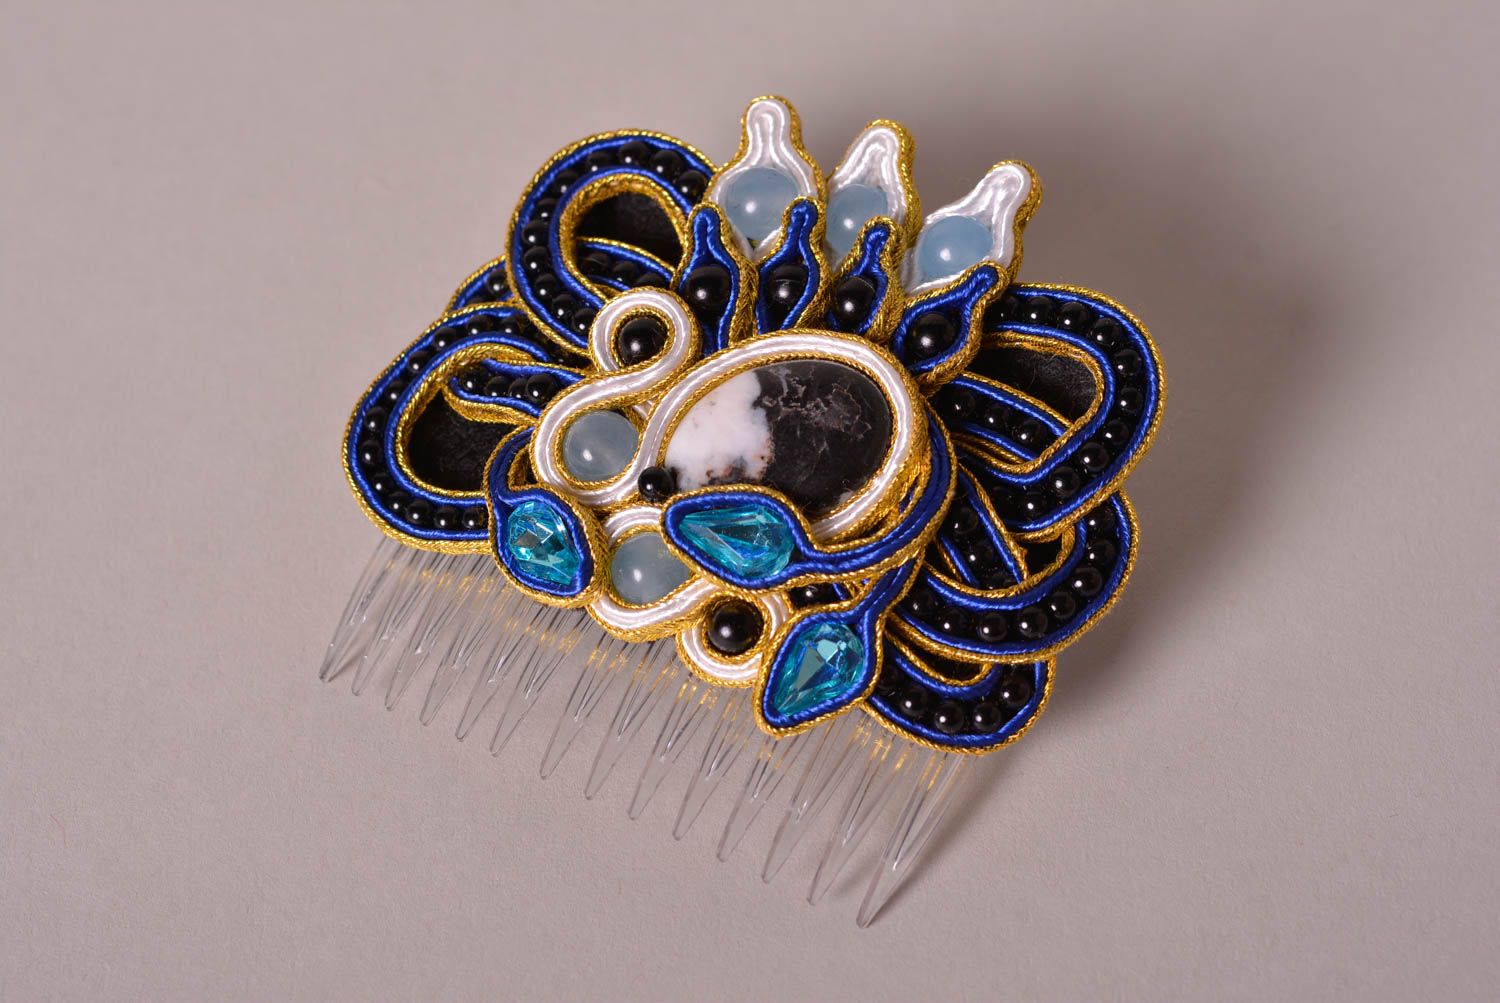 Handmade designer hair comb soutache hair jewelry hair accessories gifts for her photo 1